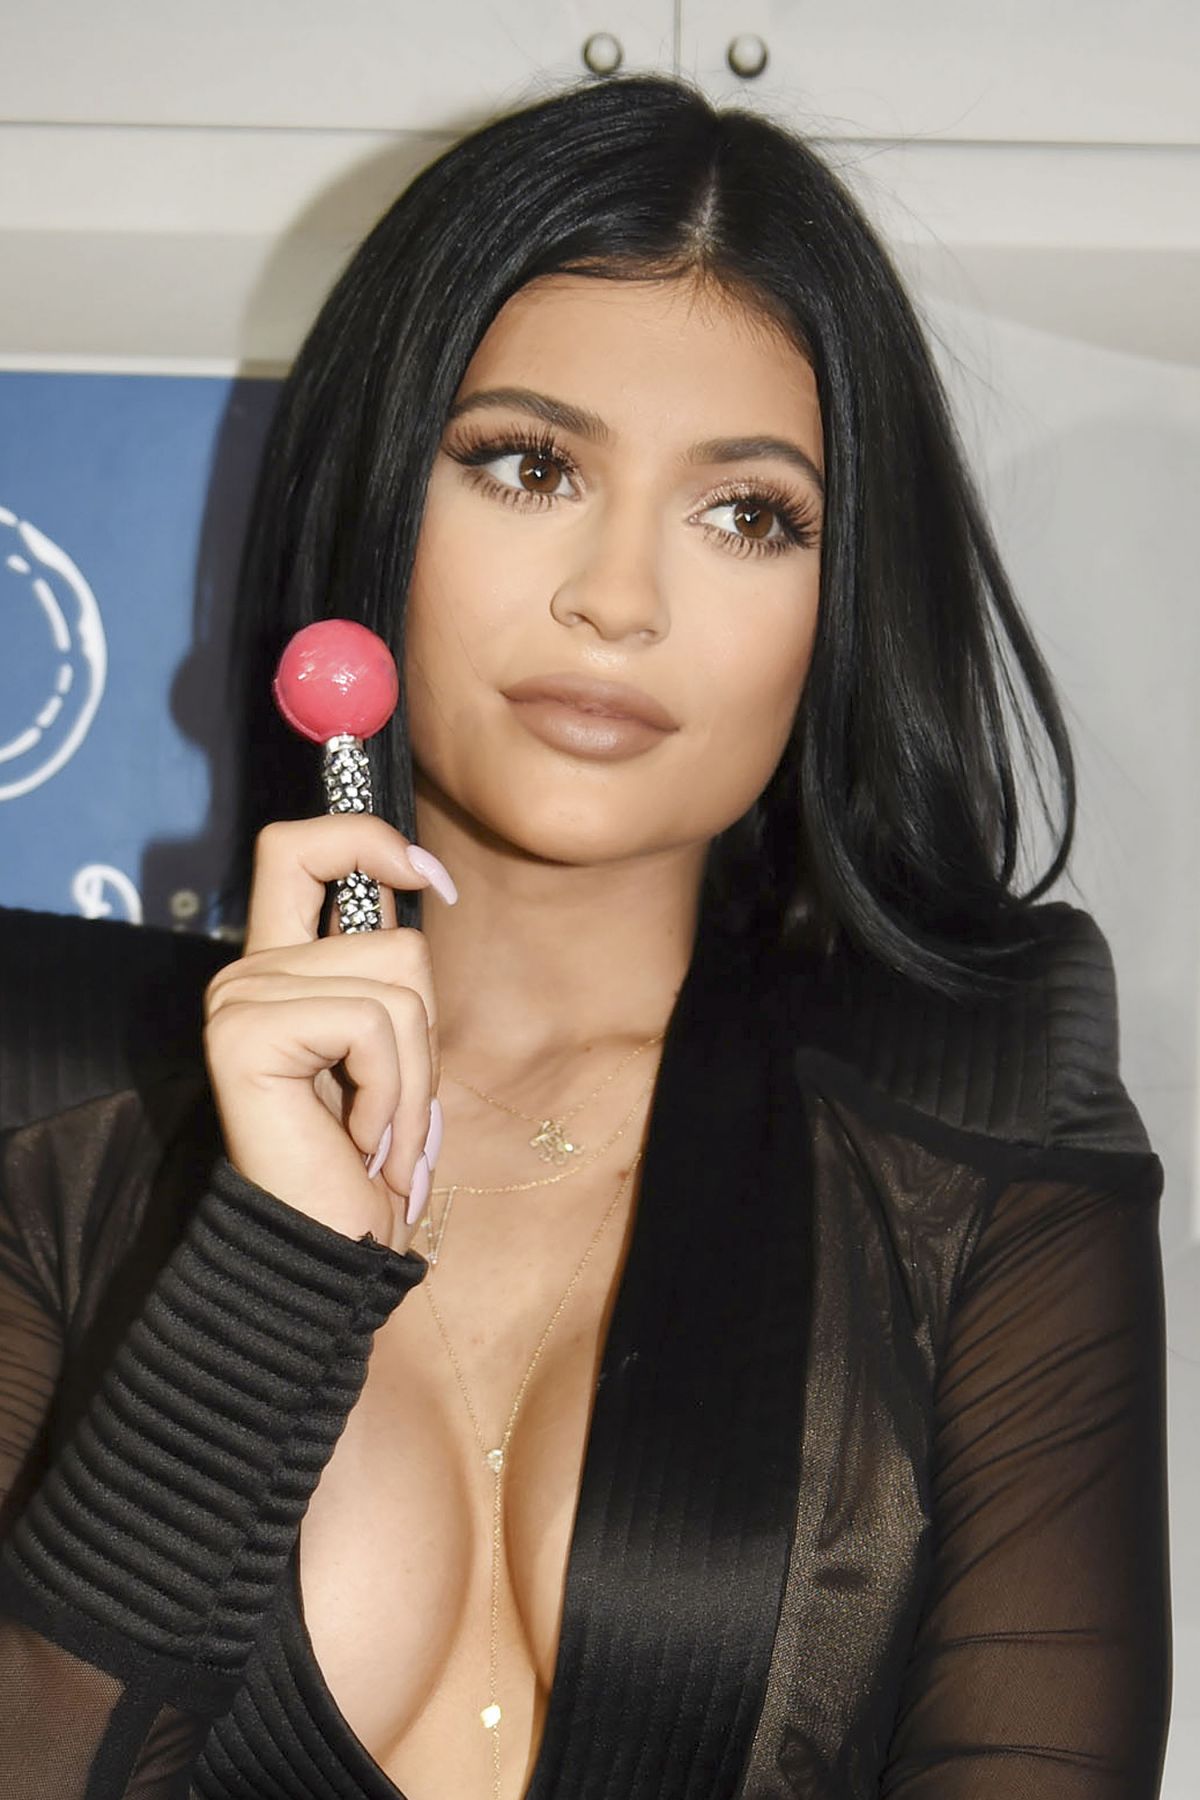 KYLIE JENNER at Sugar Factory Opening in Miami Beach.